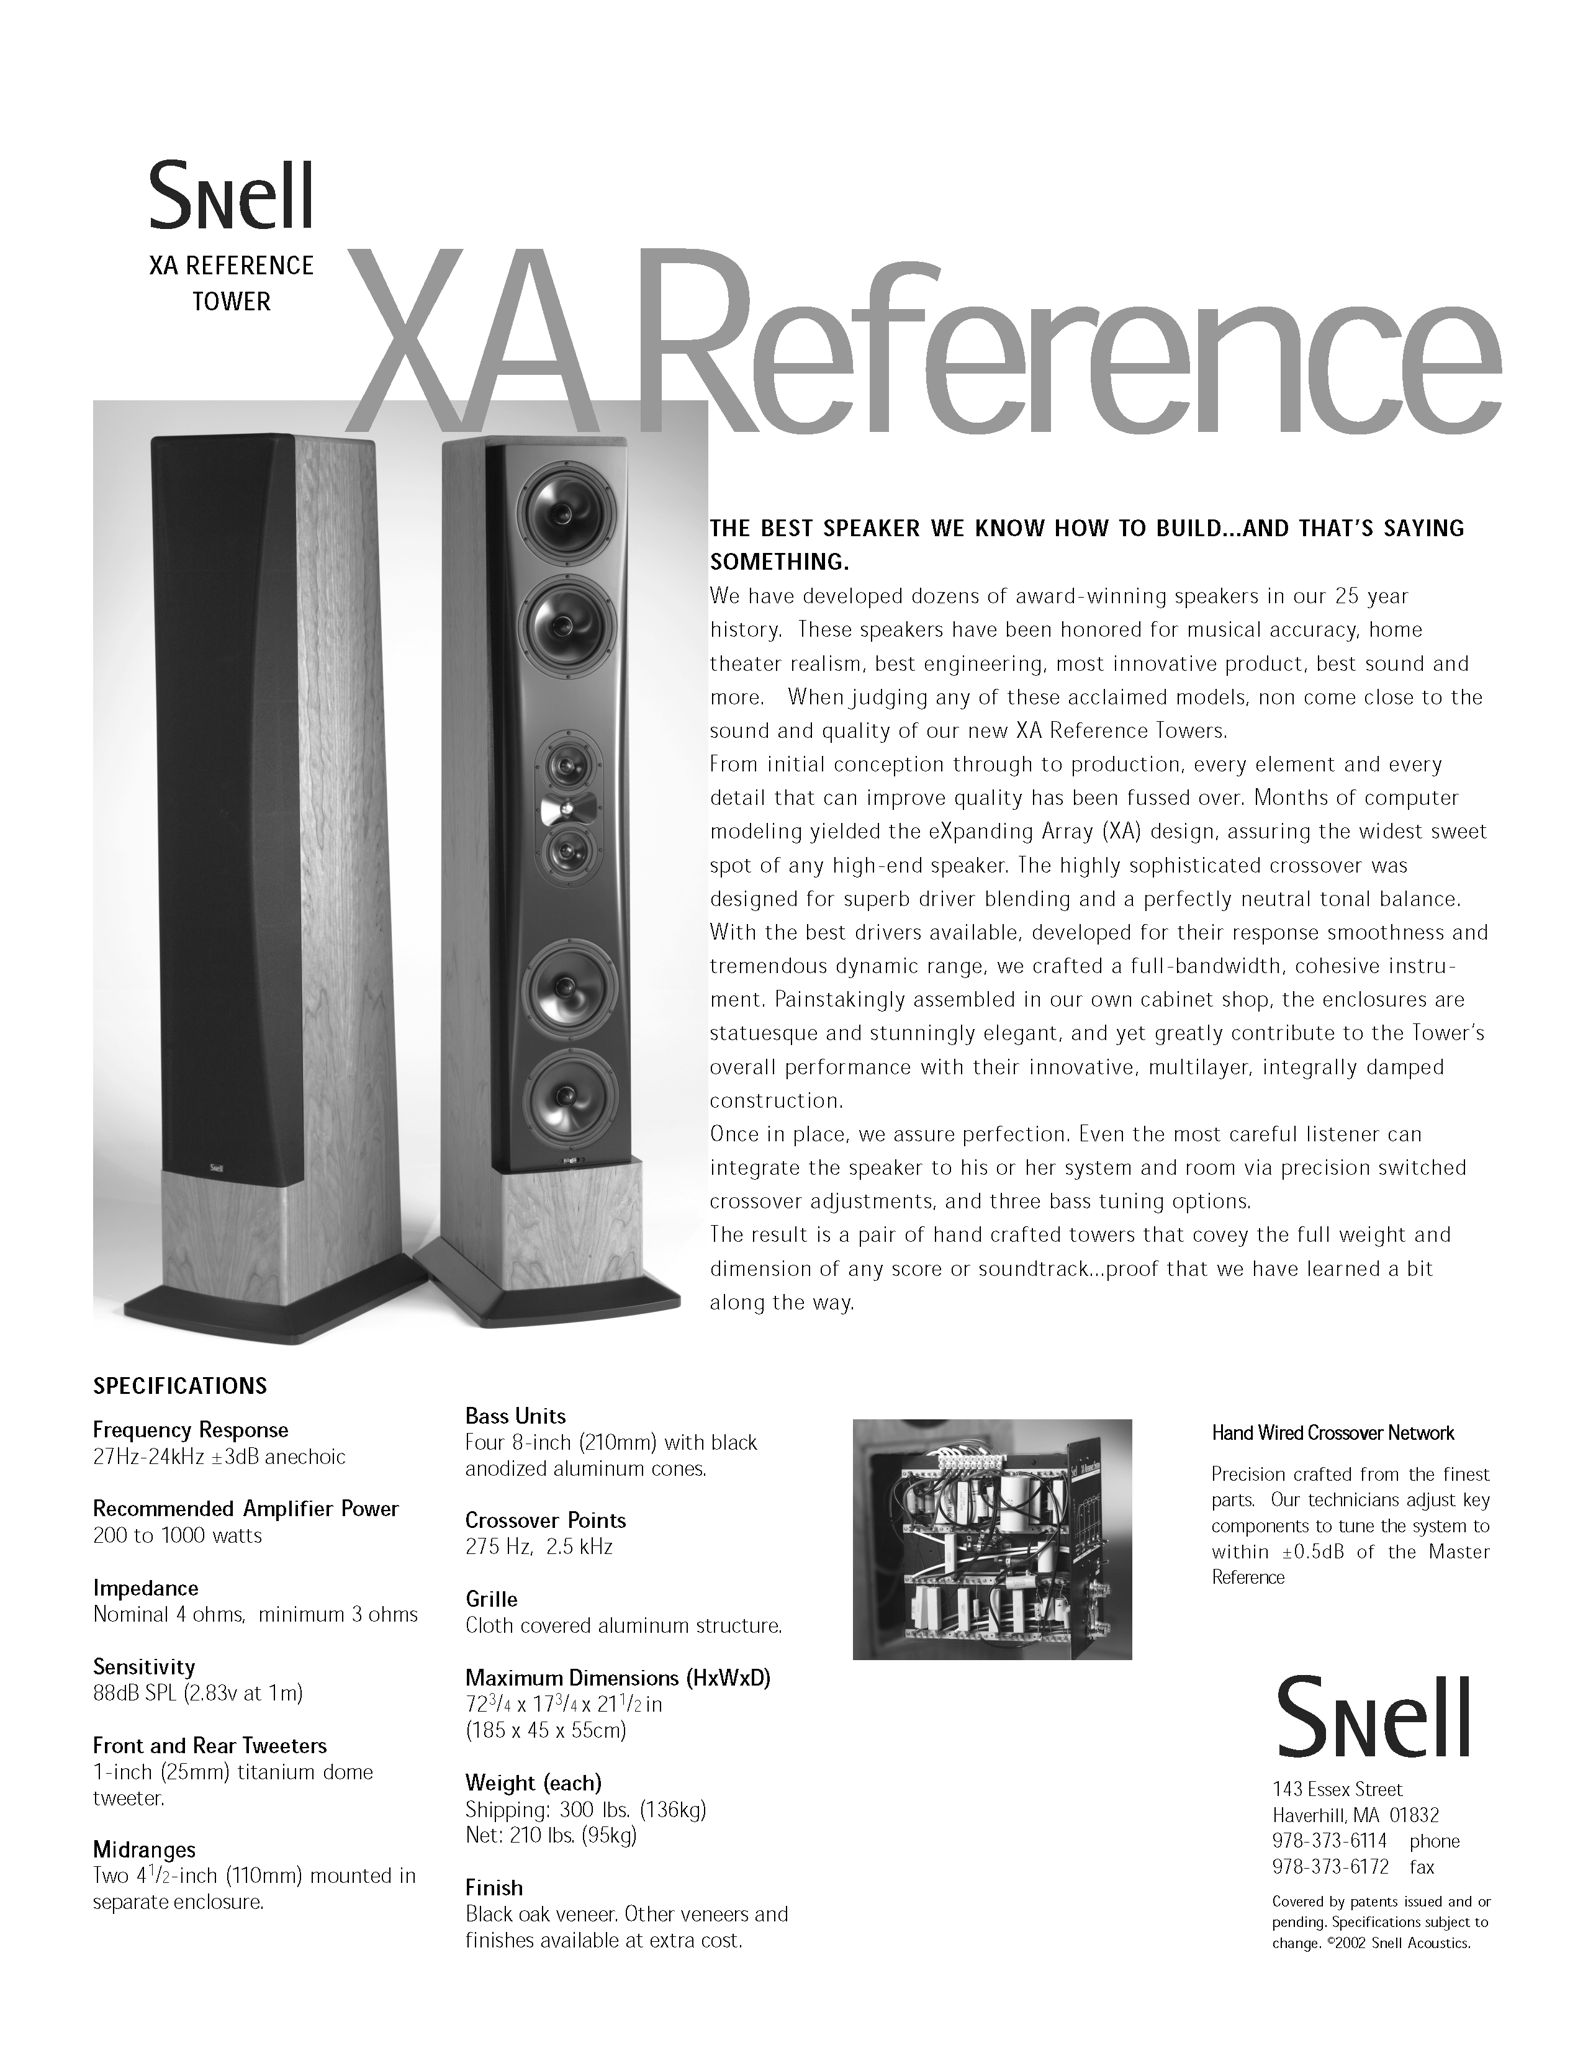 SNELL XA REFERENCE TOWER LOUDSPEAKERS 12